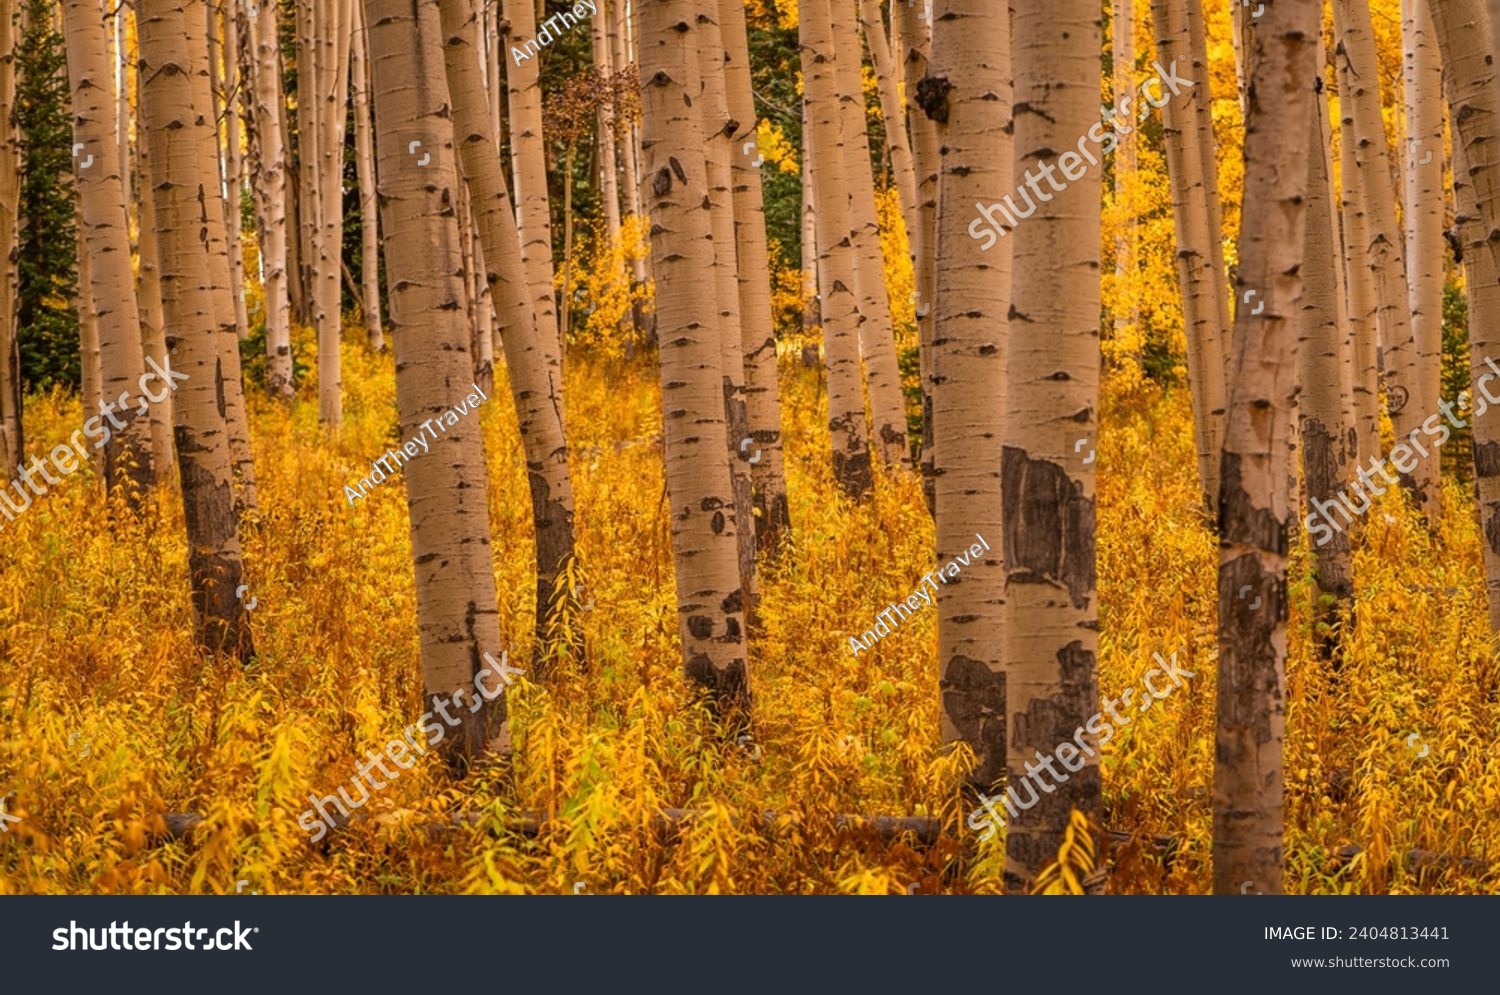 Beautiful Golden Yellow Forest of Aspen Trees in Autumn in Colorado #2404813441